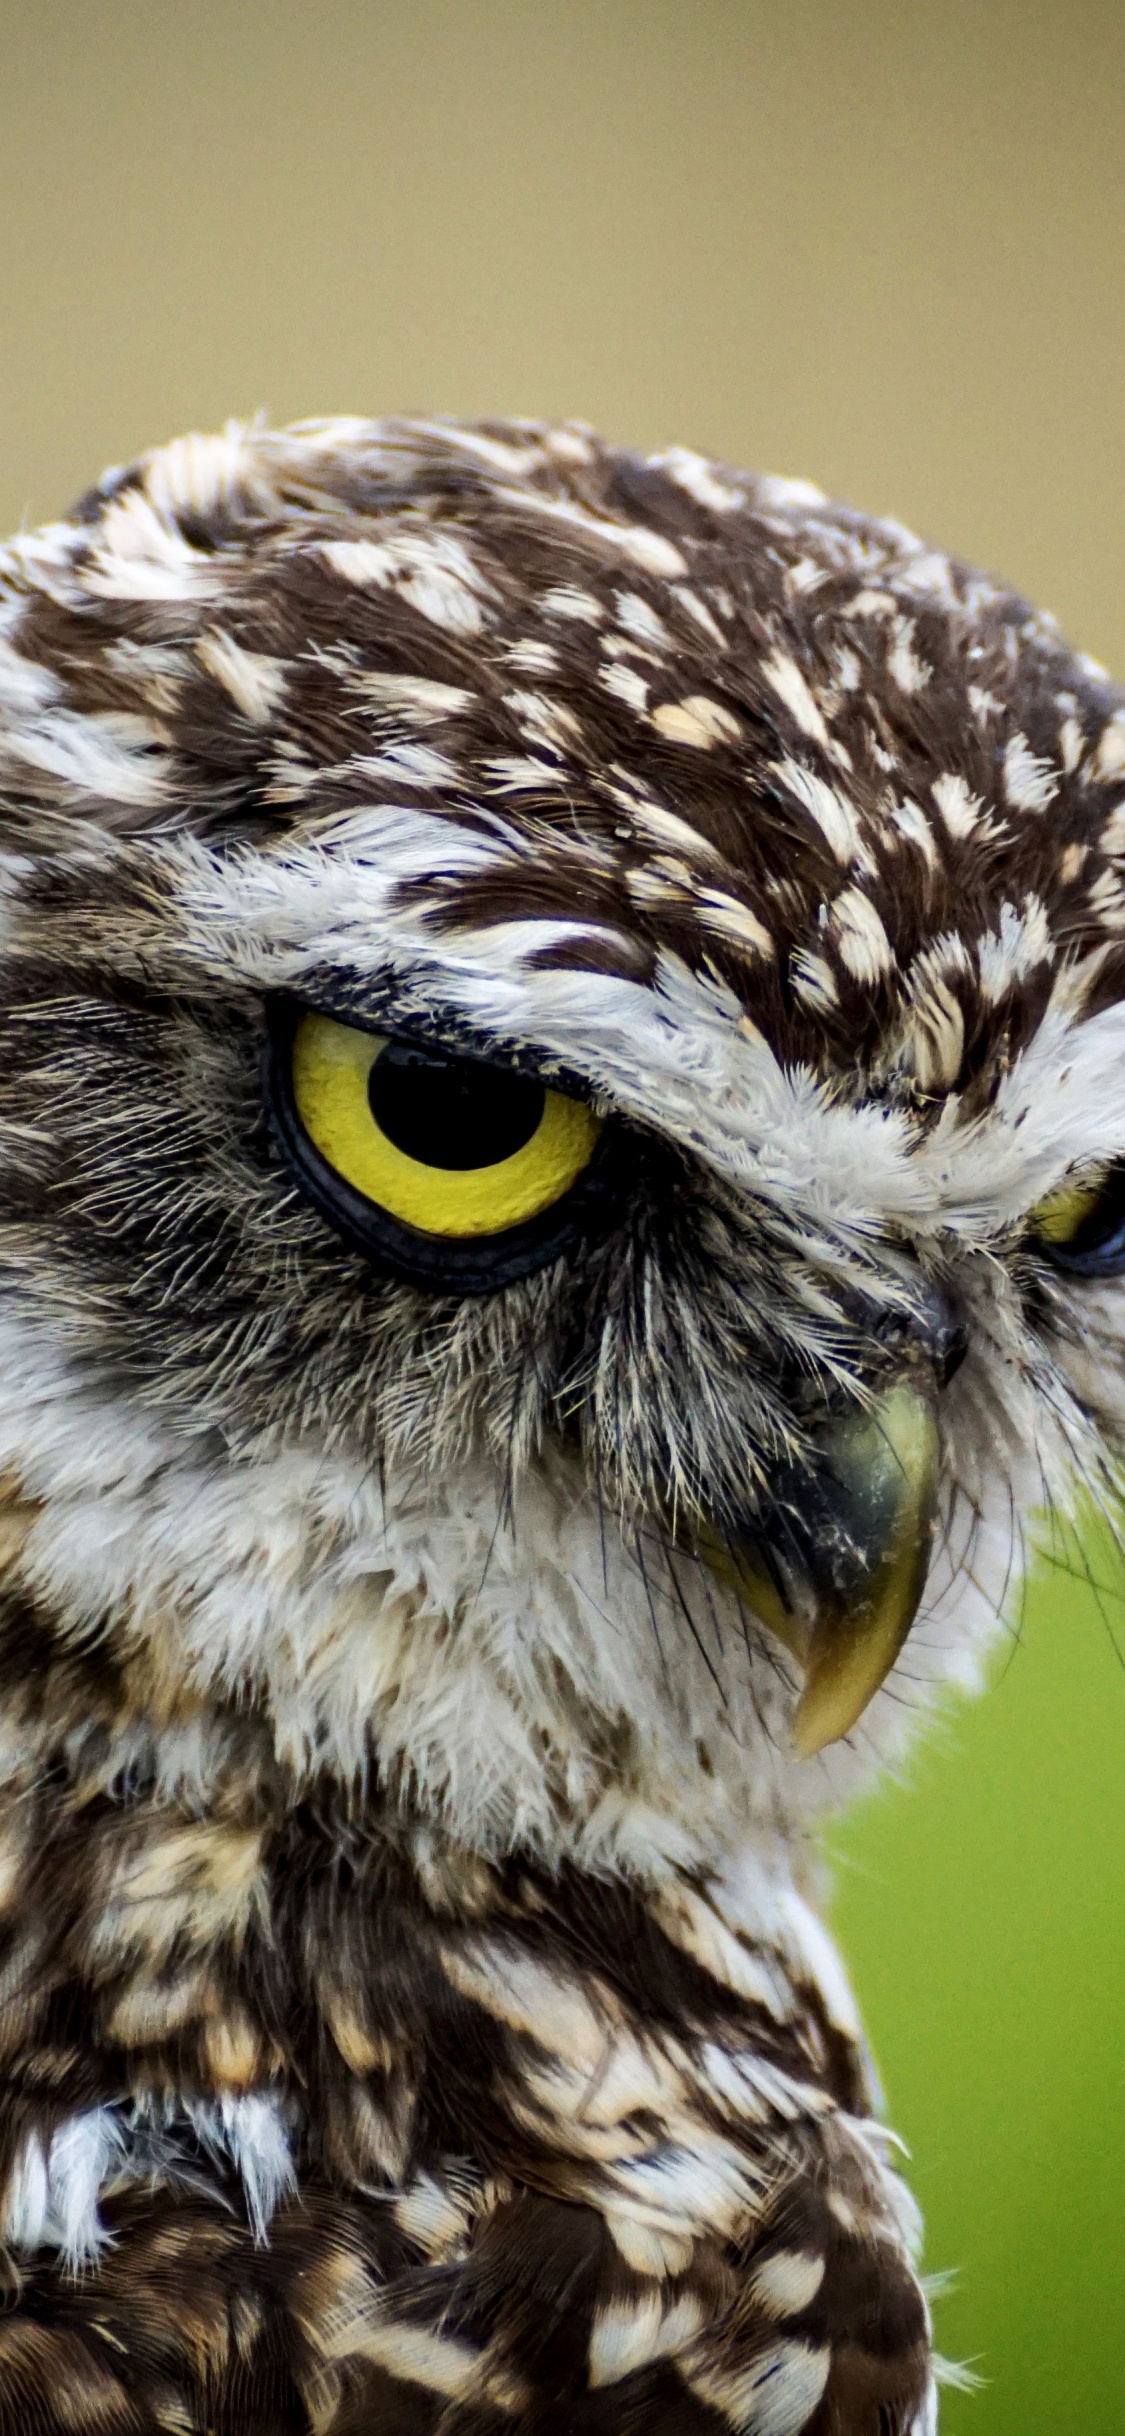 Brown and White Owl in Close up Photography During Daytime. Wallpaper in 1125x2436 Resolution